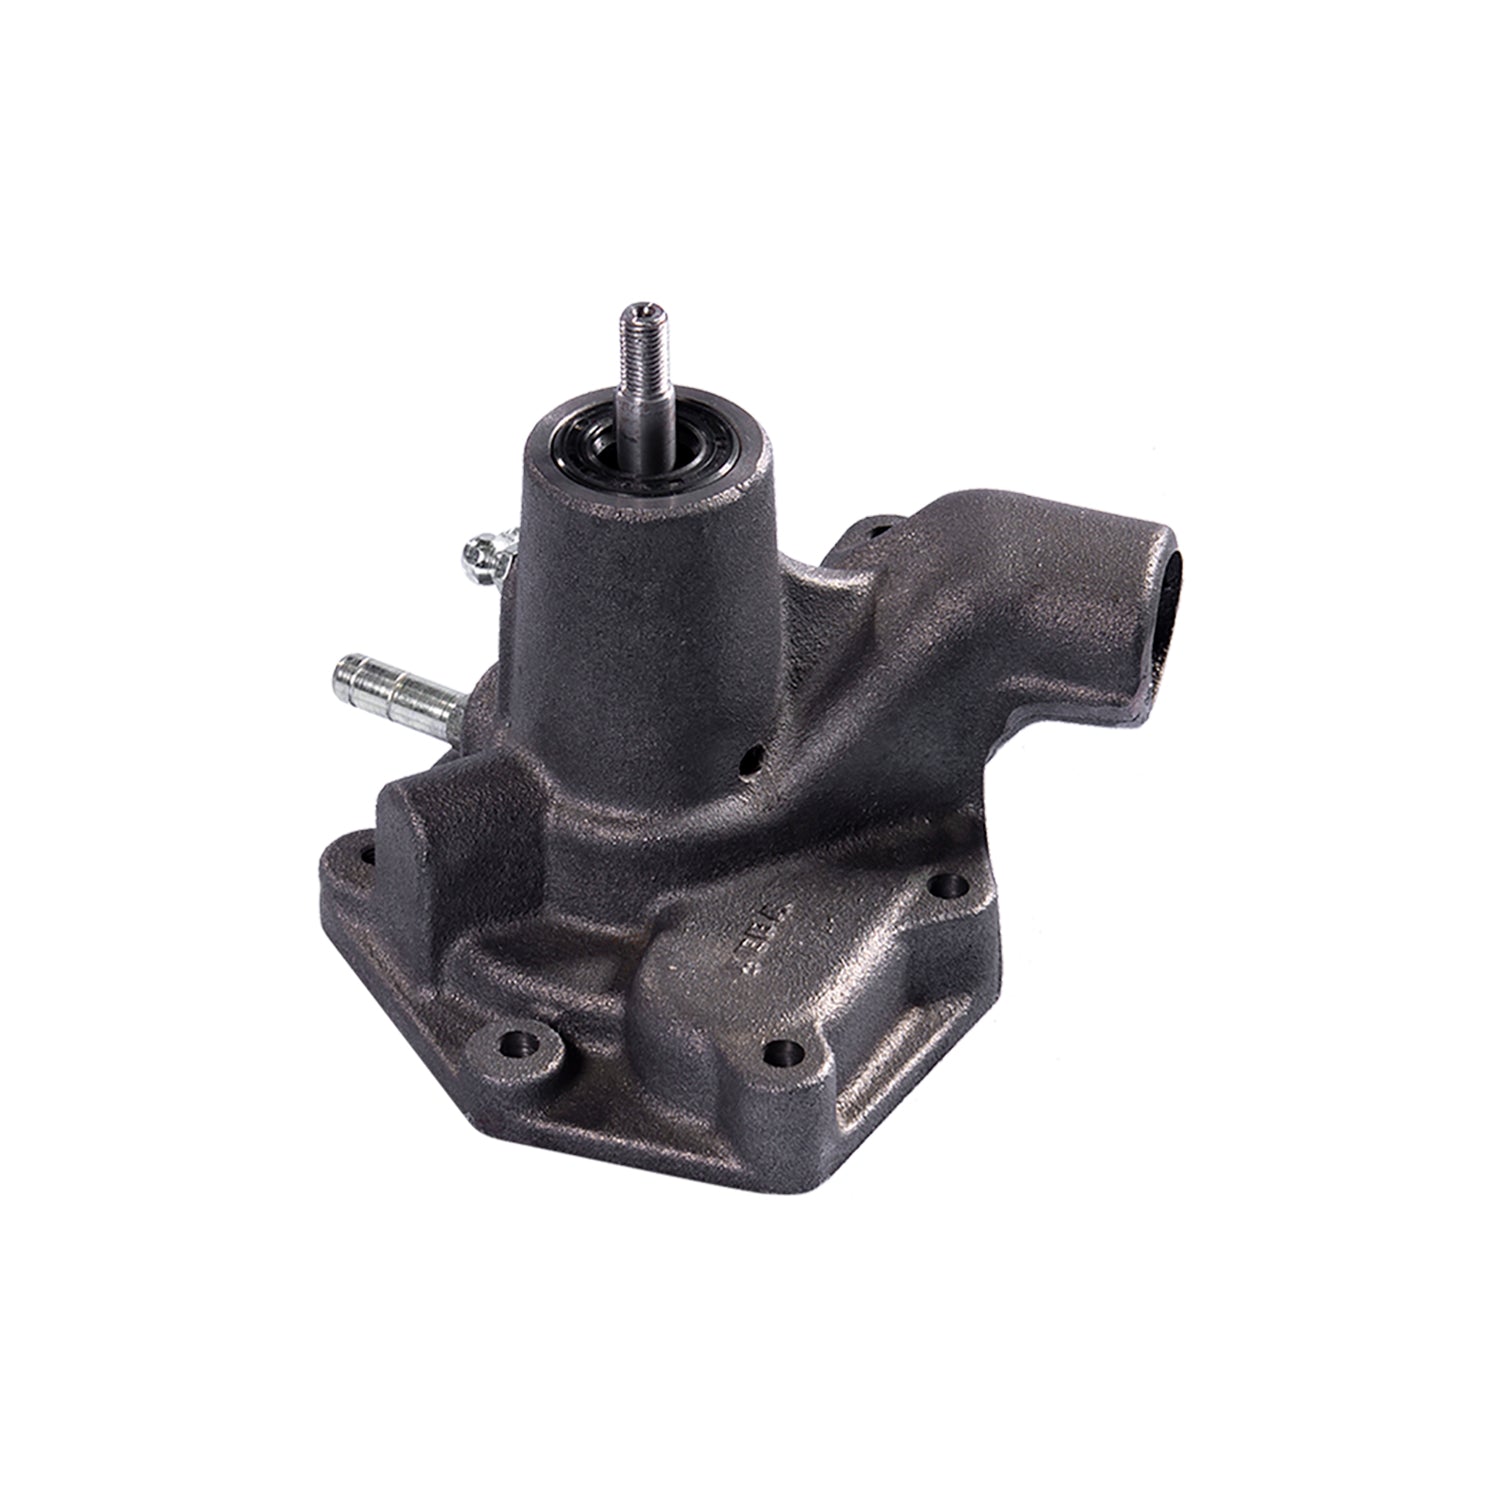 Water Pump Replacement for Fiat; 211RB, 215C, 315 566997 , 87569339